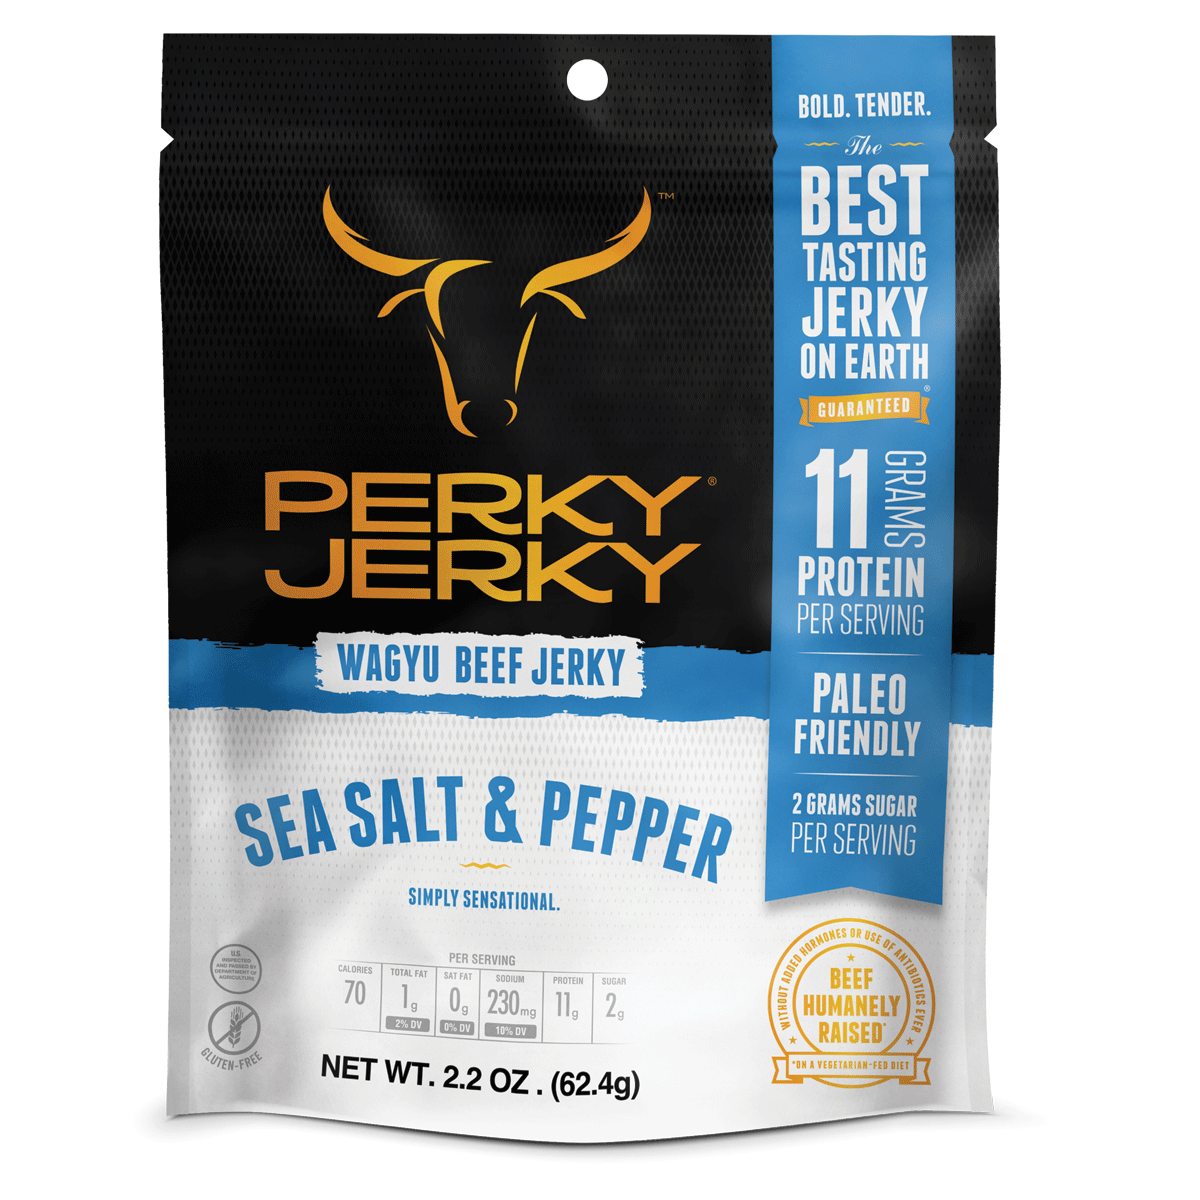 Sea Salt and Pepper Wagyu Beef Jerky package 